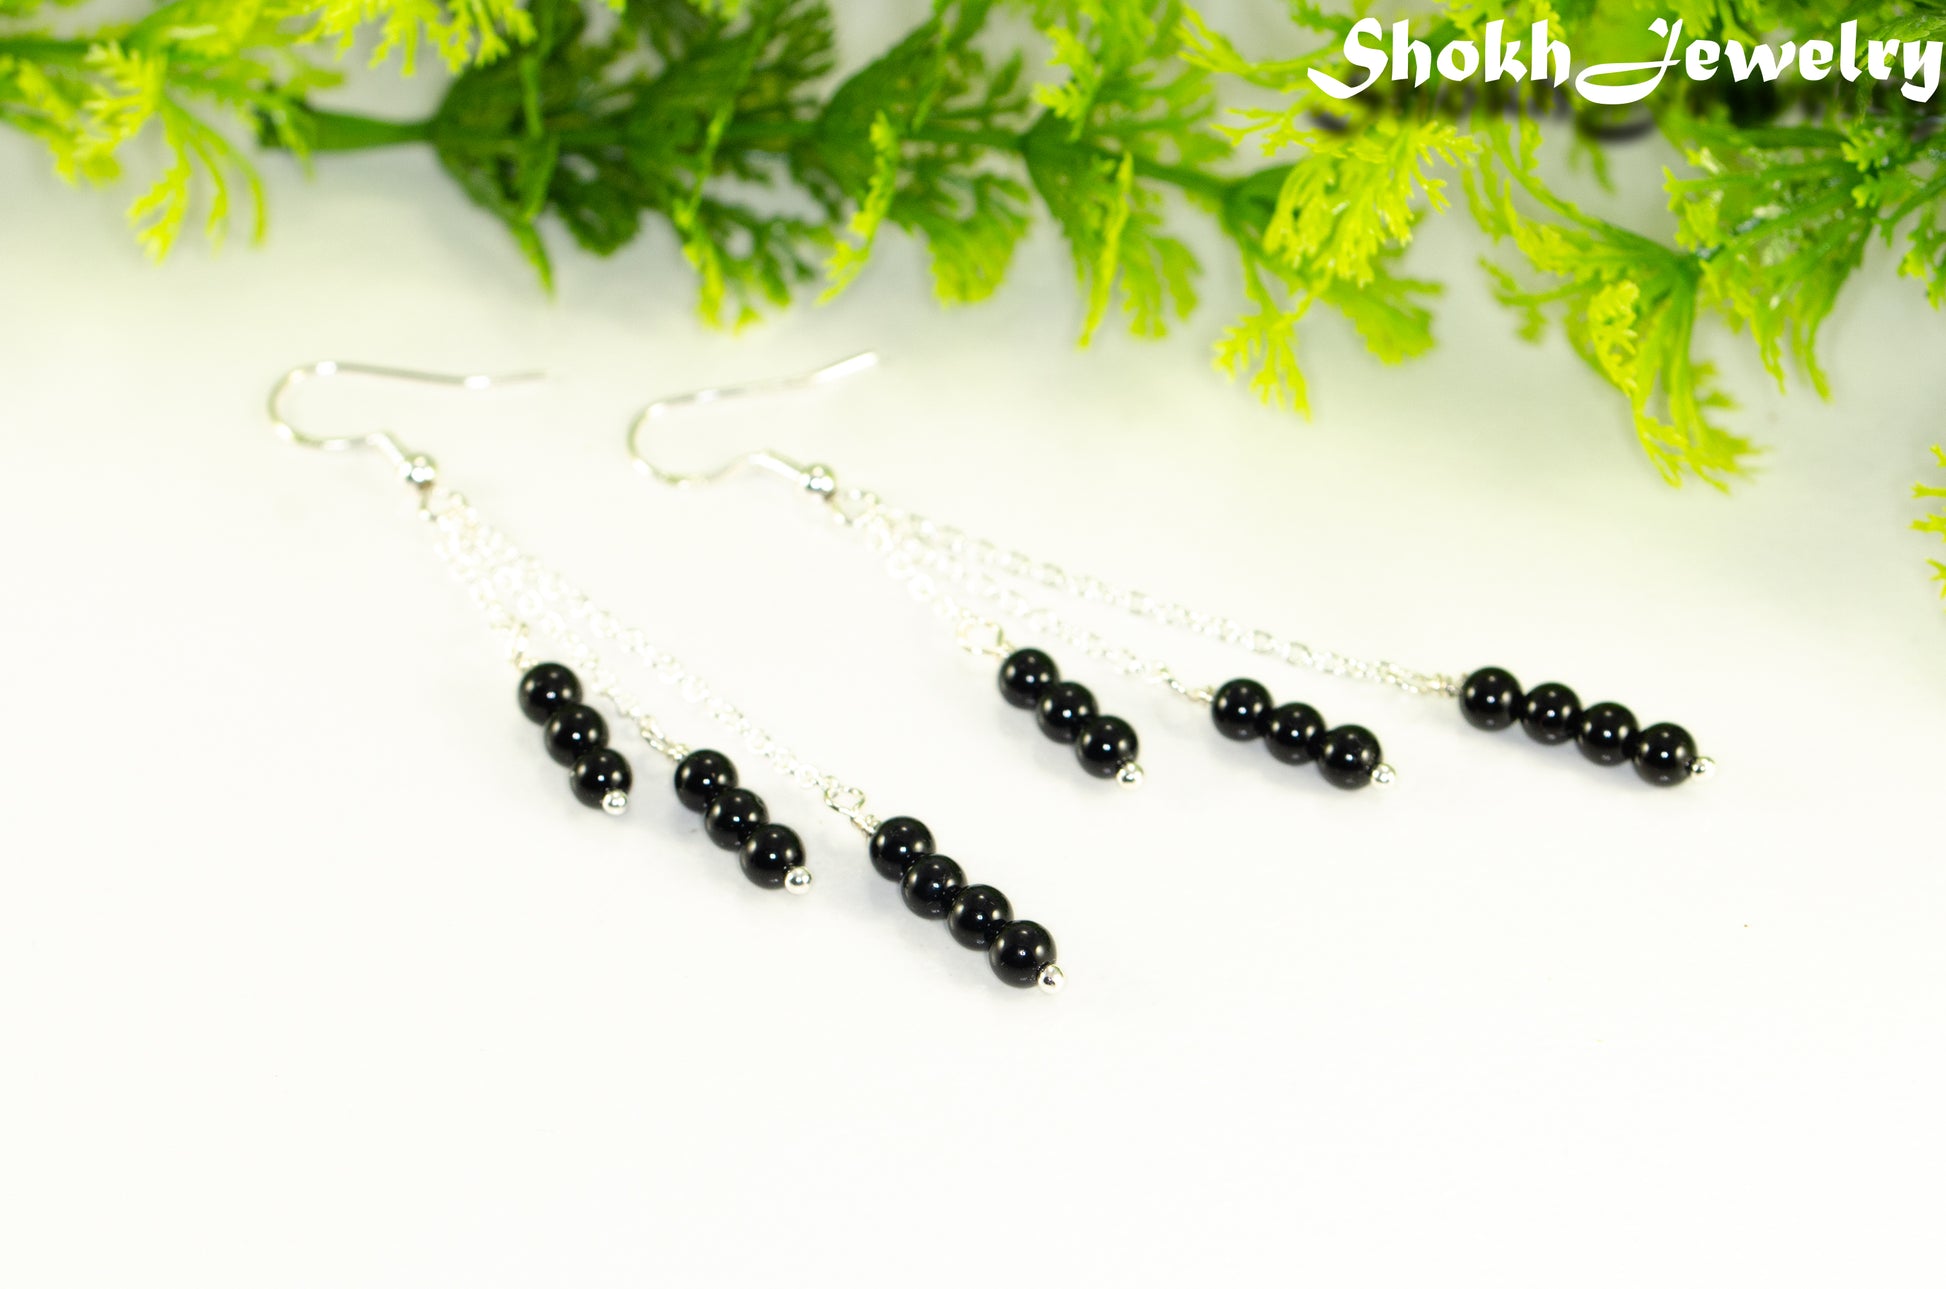 Silver Plated Chain and Black Onyx Stone Earrings.